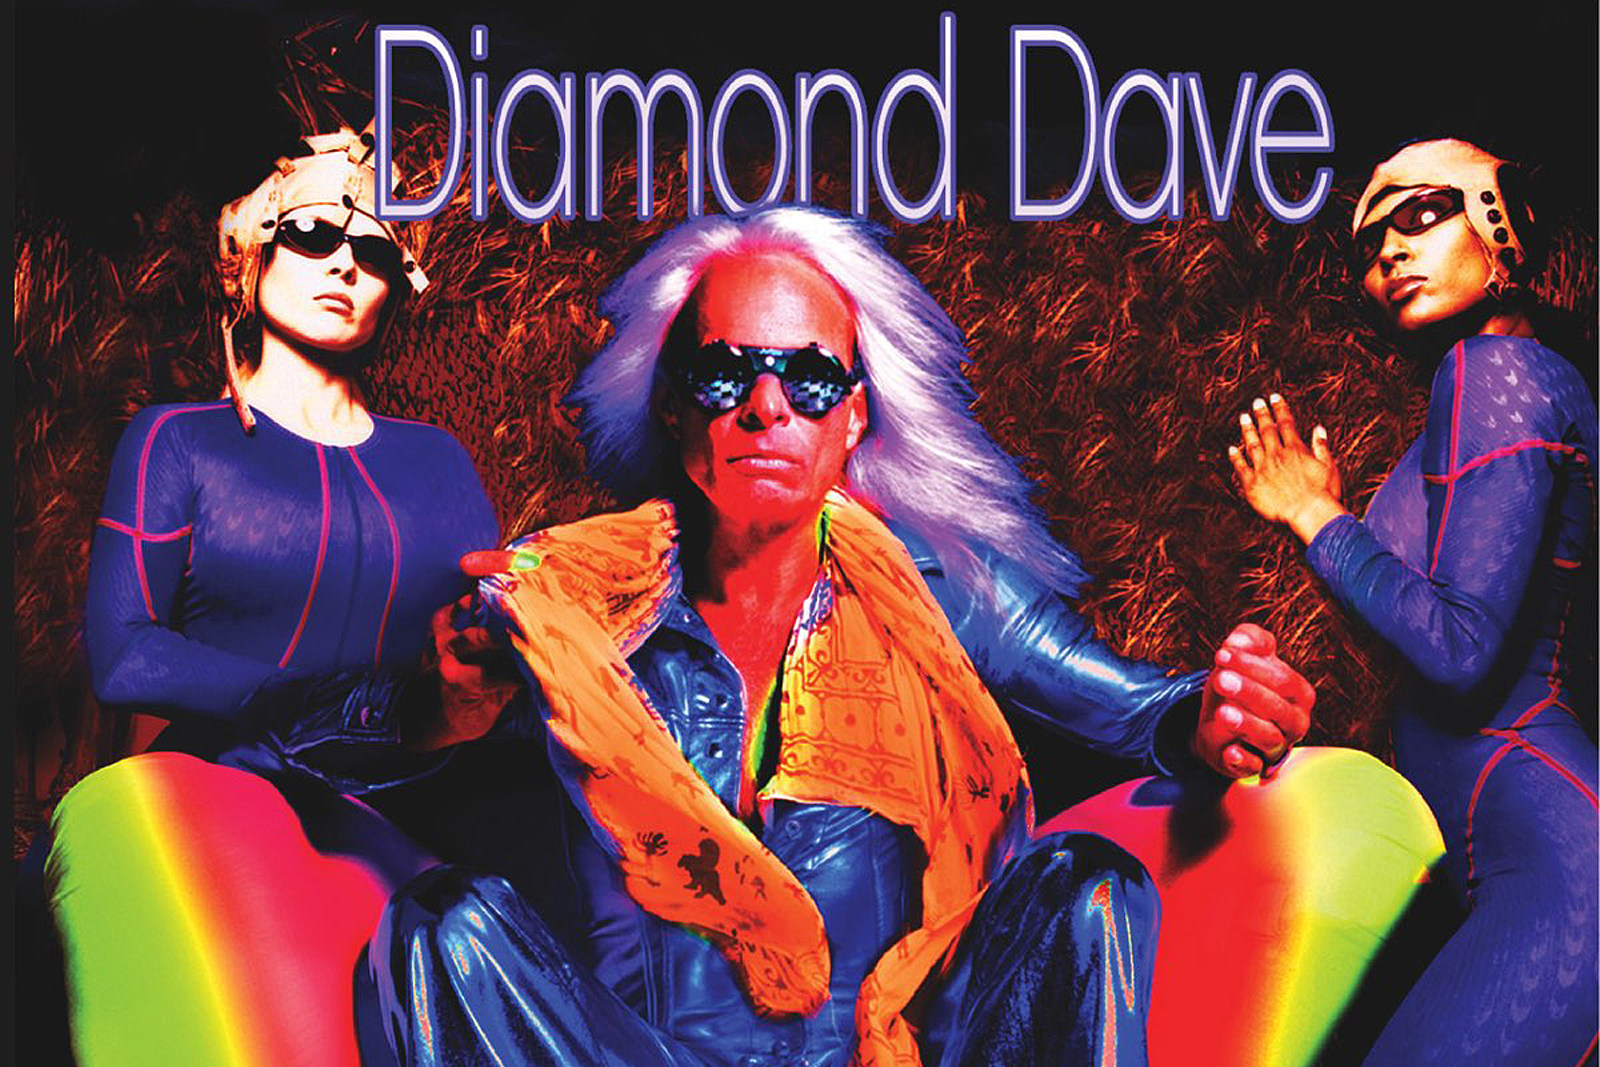 How David Lee Roth’s Solo Career Flamed Out With ‘Diamond Dave’